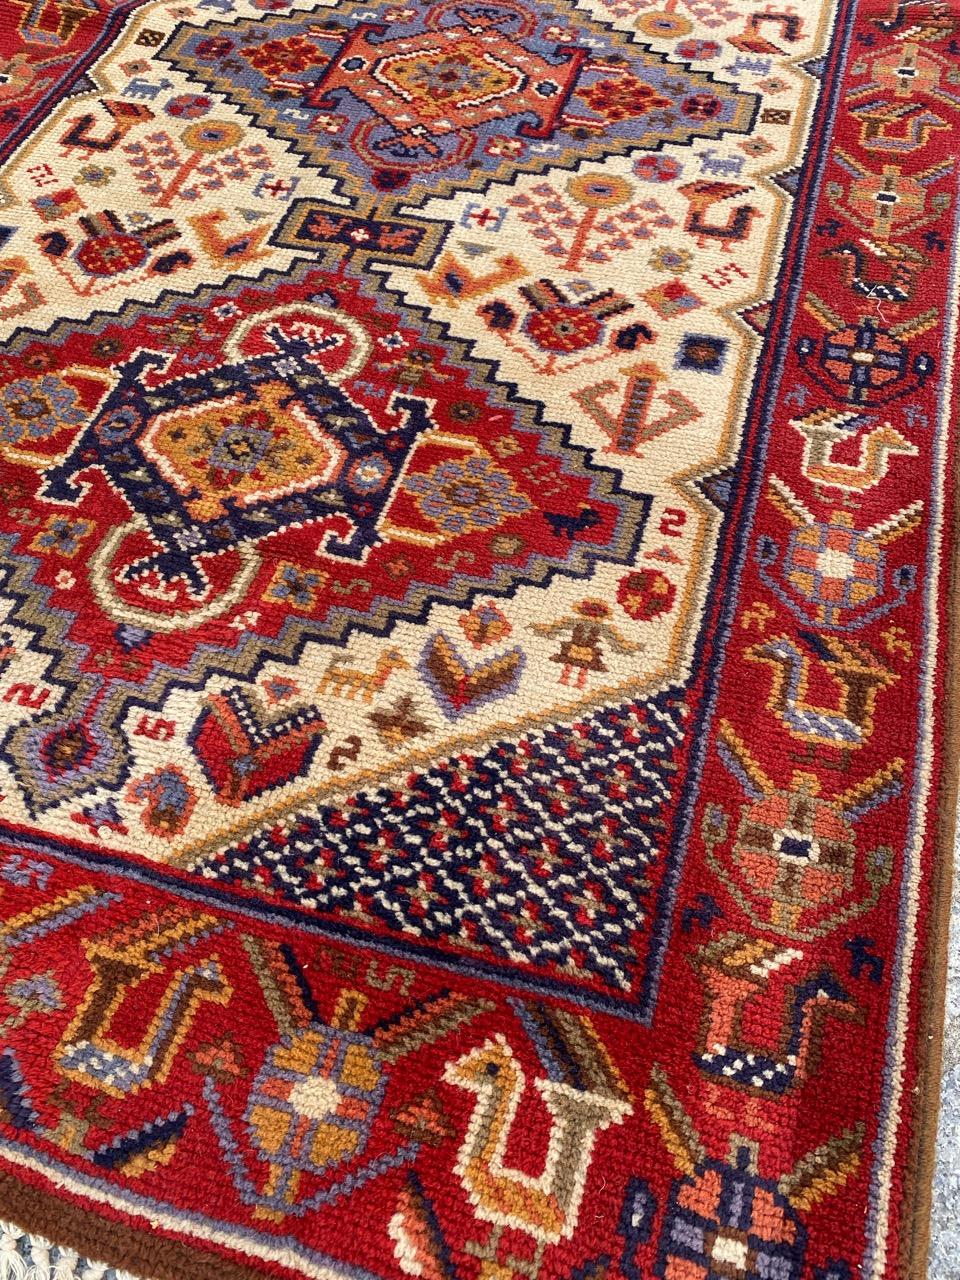 Beautiful French Hallway Rug from the mid-20th century. This rug is a masterpiece, meticulously knotted with wool on a cotton and jute foundation. It features a stunning Persian design inspired by Shiraz, showcasing intricate red-dark blue and light